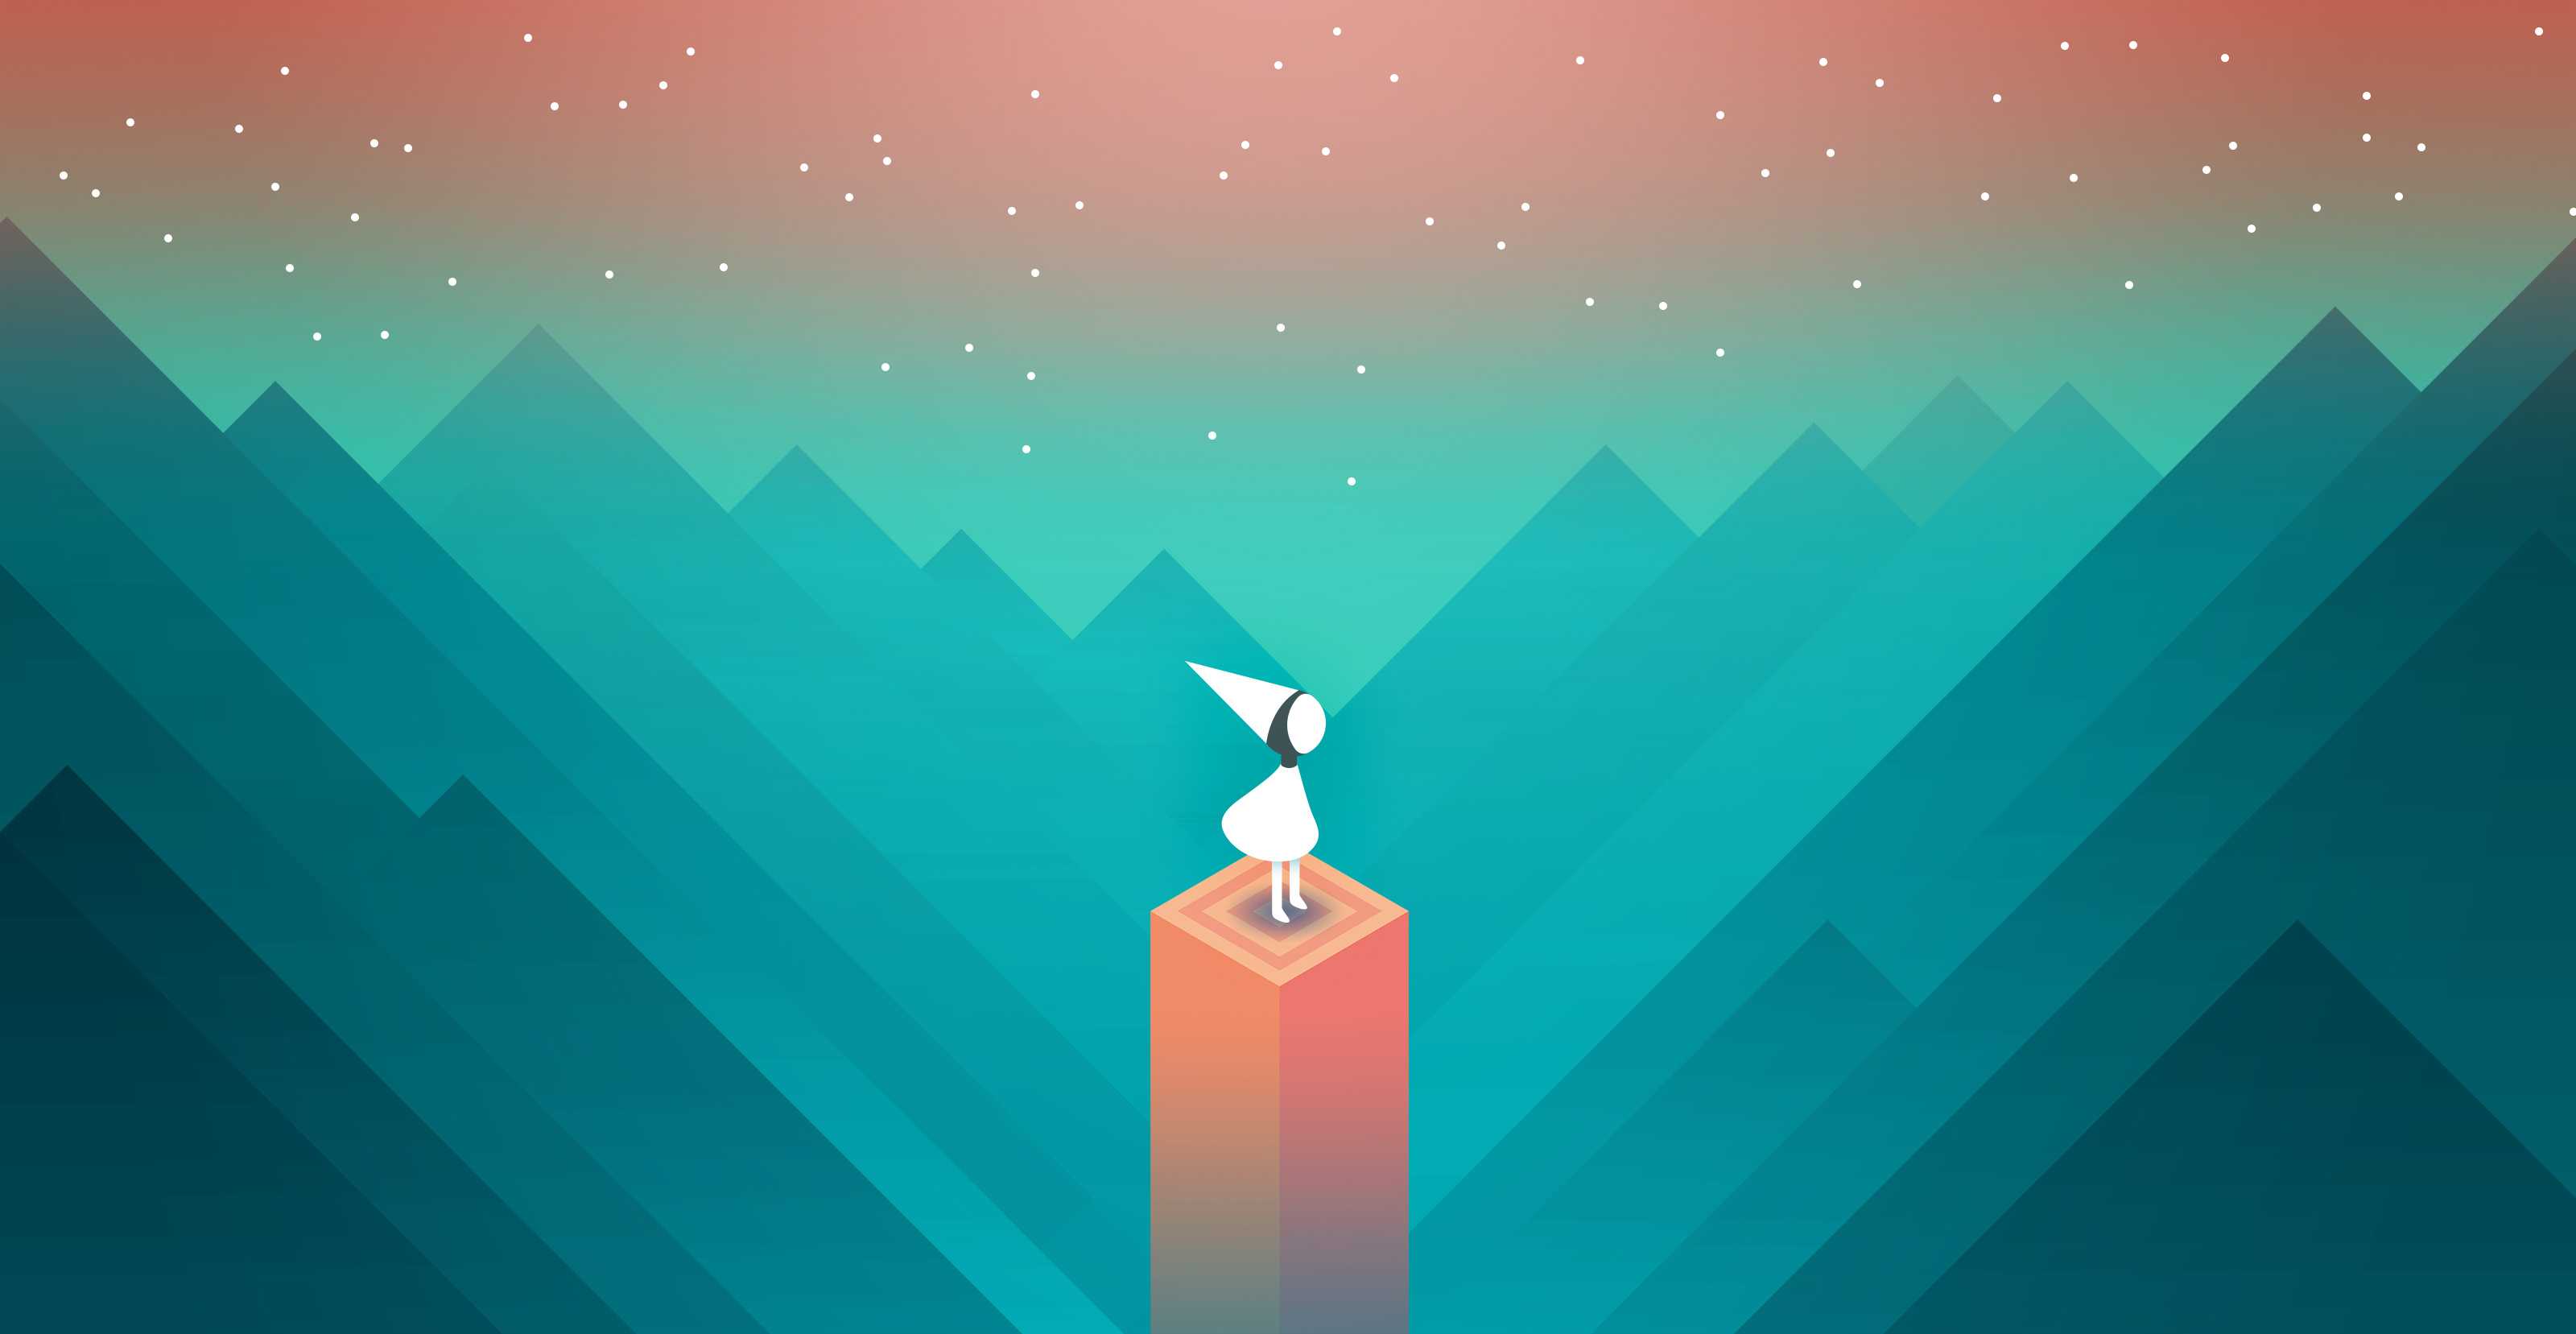 A screenshot of ustwo Games' Monument Valley 2